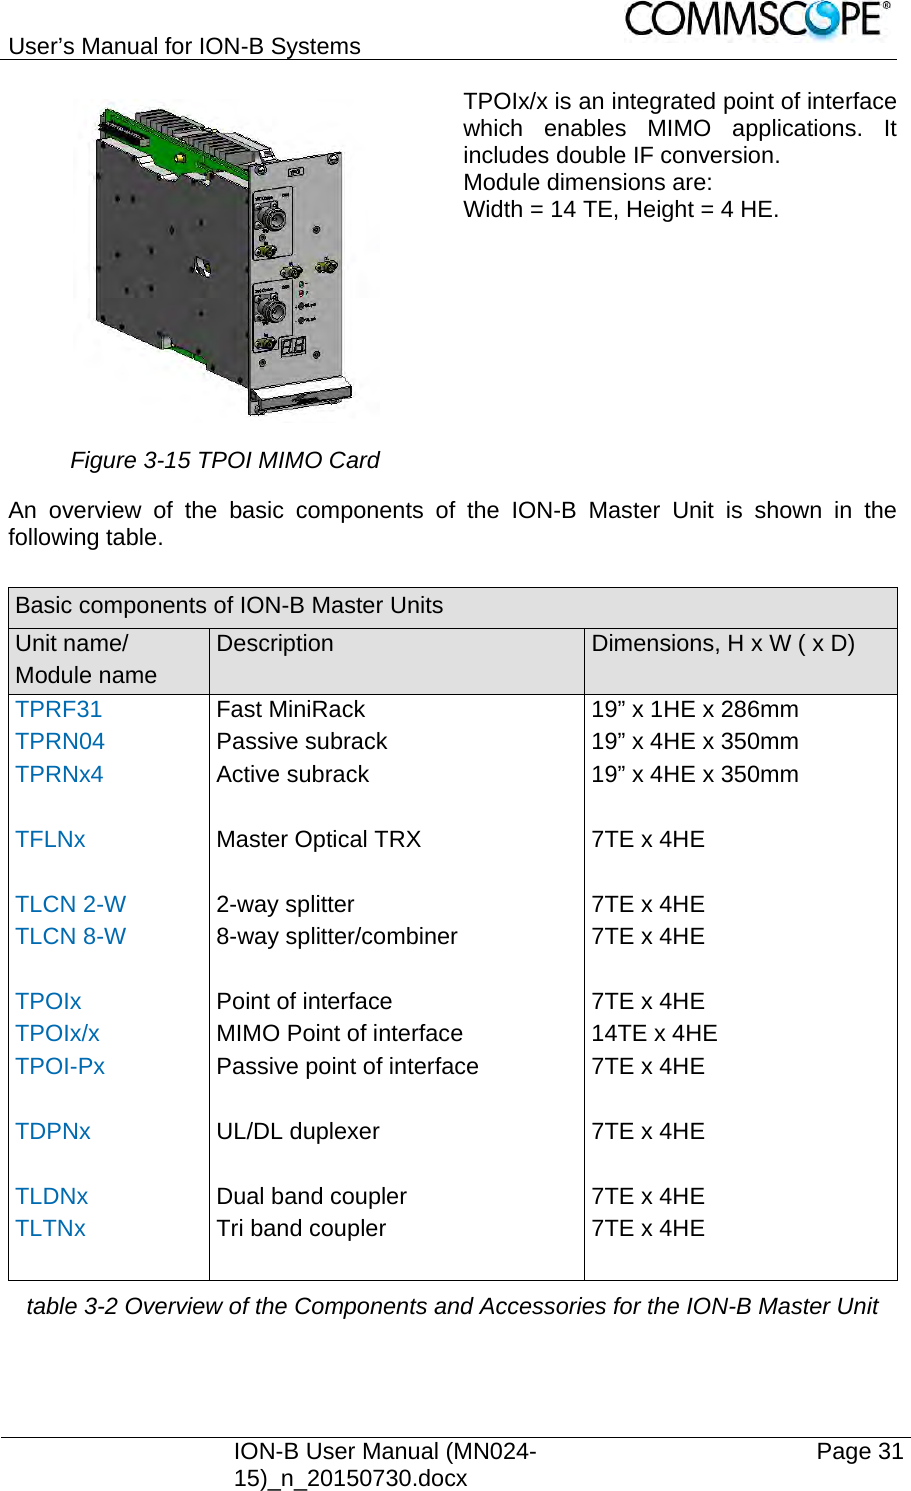 User’s Manual for ION-B Systems    ION-B User Manual (MN024-15)_n_20150730.docx  Page 31  TPOIx/x is an integrated point of interface which enables MIMO applications. It includes double IF conversion. Module dimensions are:  Width = 14 TE, Height = 4 HE. Figure 3-15 TPOI MIMO Card An overview of the basic components of the ION-B Master Unit is shown in the following table.  Basic components of ION-B Master Units Unit name/ Module name Description  Dimensions, H x W ( x D)  TPRF31 TPRN04 TPRNx4  TFLNx  TLCN 2-W TLCN 8-W  TPOIx TPOIx/x TPOI-Px  TDPNx  TLDNx TLTNx  Fast MiniRack Passive subrack Active subrack  Master Optical TRX  2-way splitter 8-way splitter/combiner  Point of interface MIMO Point of interface Passive point of interface  UL/DL duplexer  Dual band coupler Tri band coupler  19” x 1HE x 286mm 19” x 4HE x 350mm 19” x 4HE x 350mm  7TE x 4HE  7TE x 4HE 7TE x 4HE  7TE x 4HE 14TE x 4HE 7TE x 4HE  7TE x 4HE  7TE x 4HE 7TE x 4HE  table 3-2 Overview of the Components and Accessories for the ION-B Master Unit 